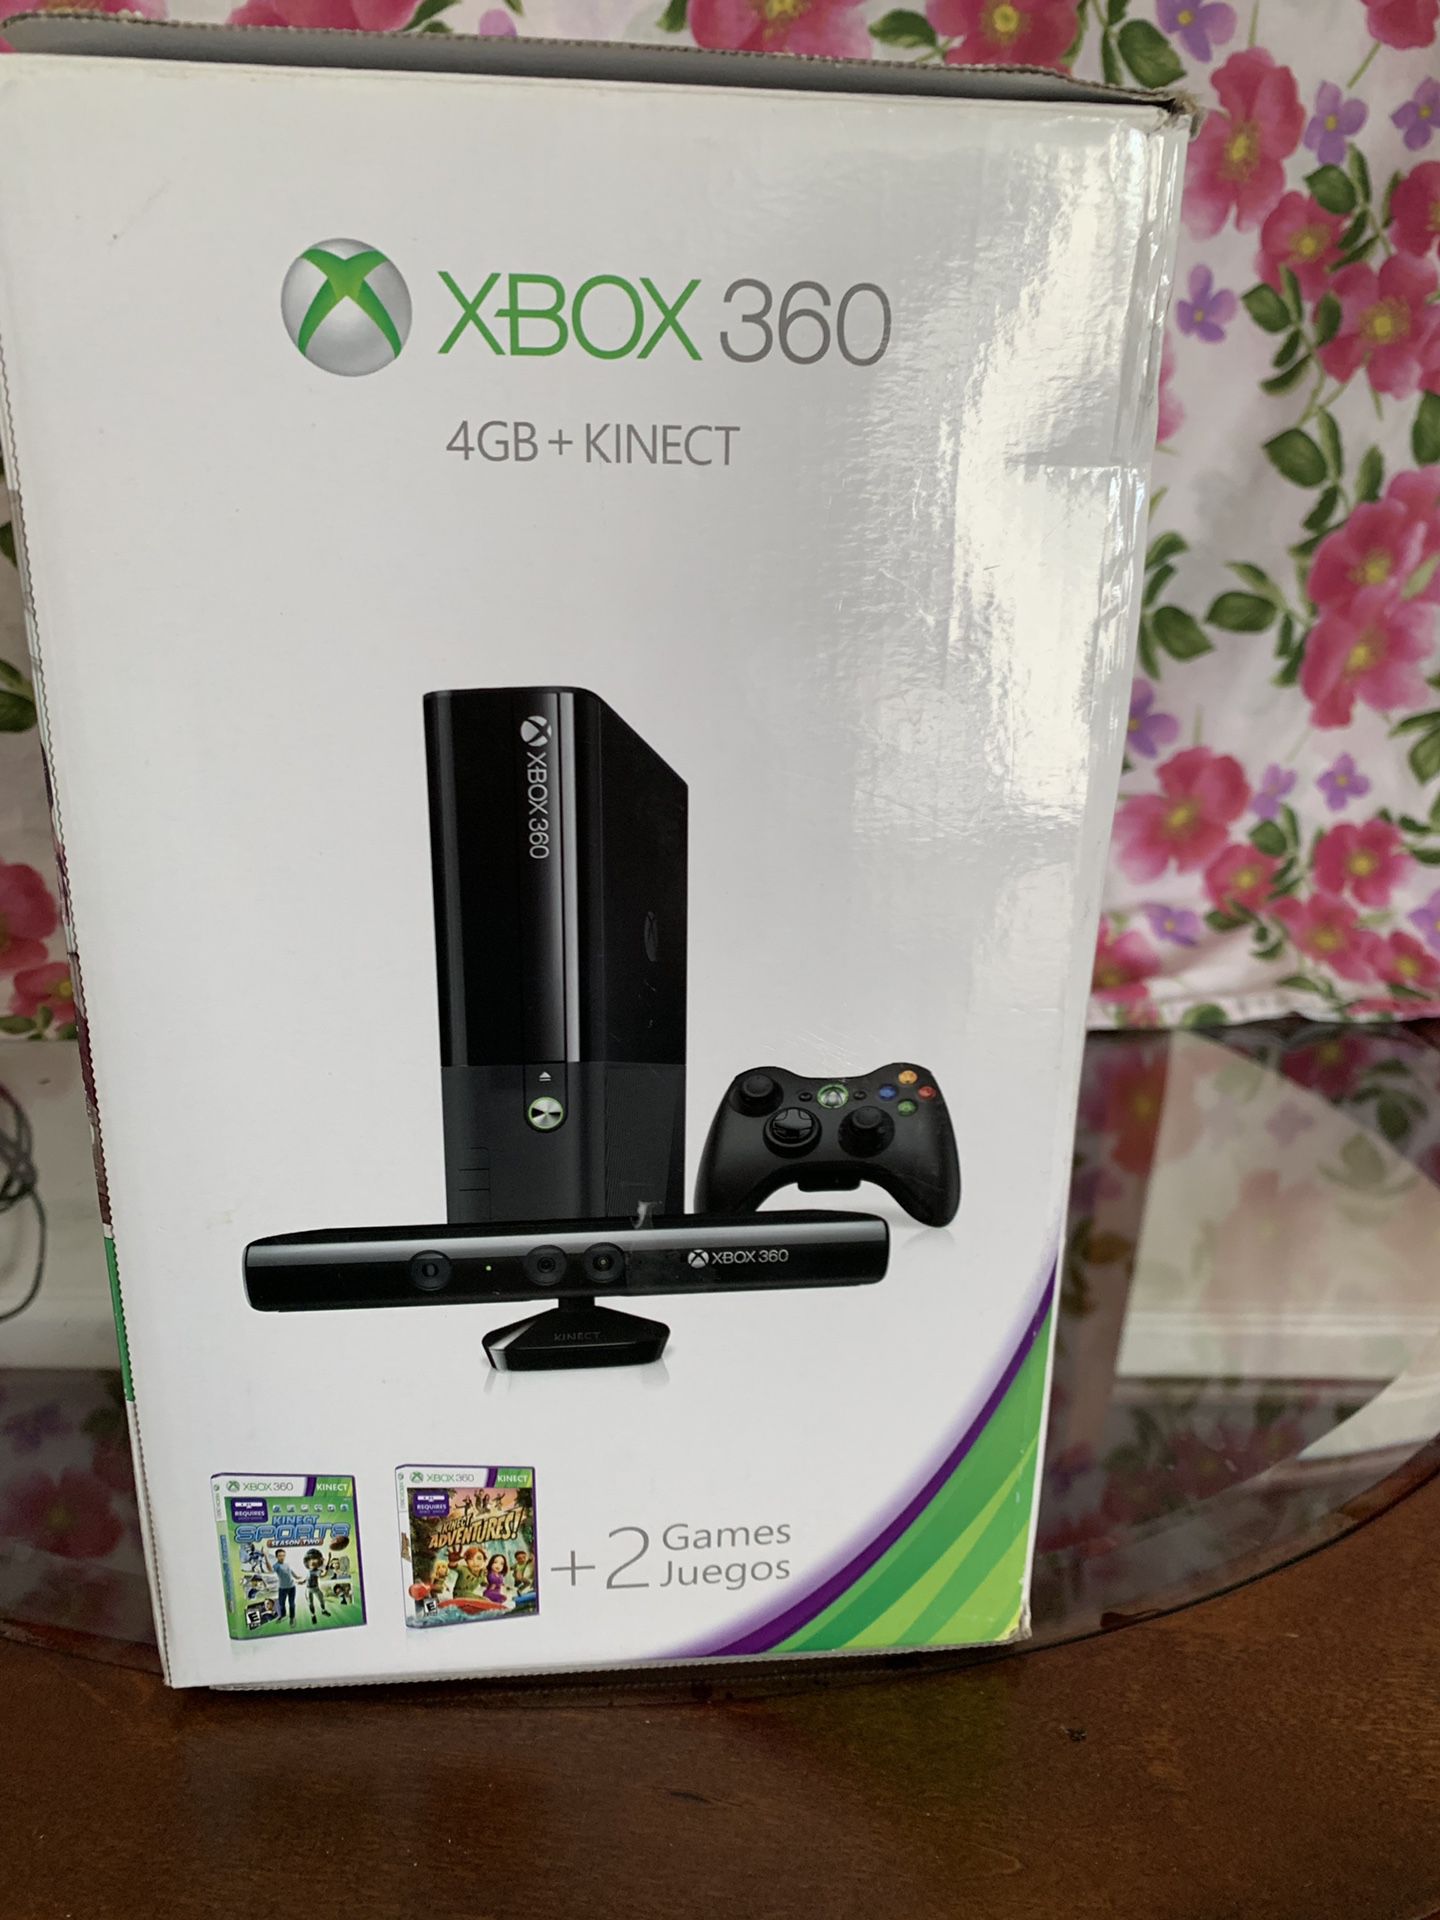 XBOX 360 4GB Console + Kinect plus 8 €Games for free included..